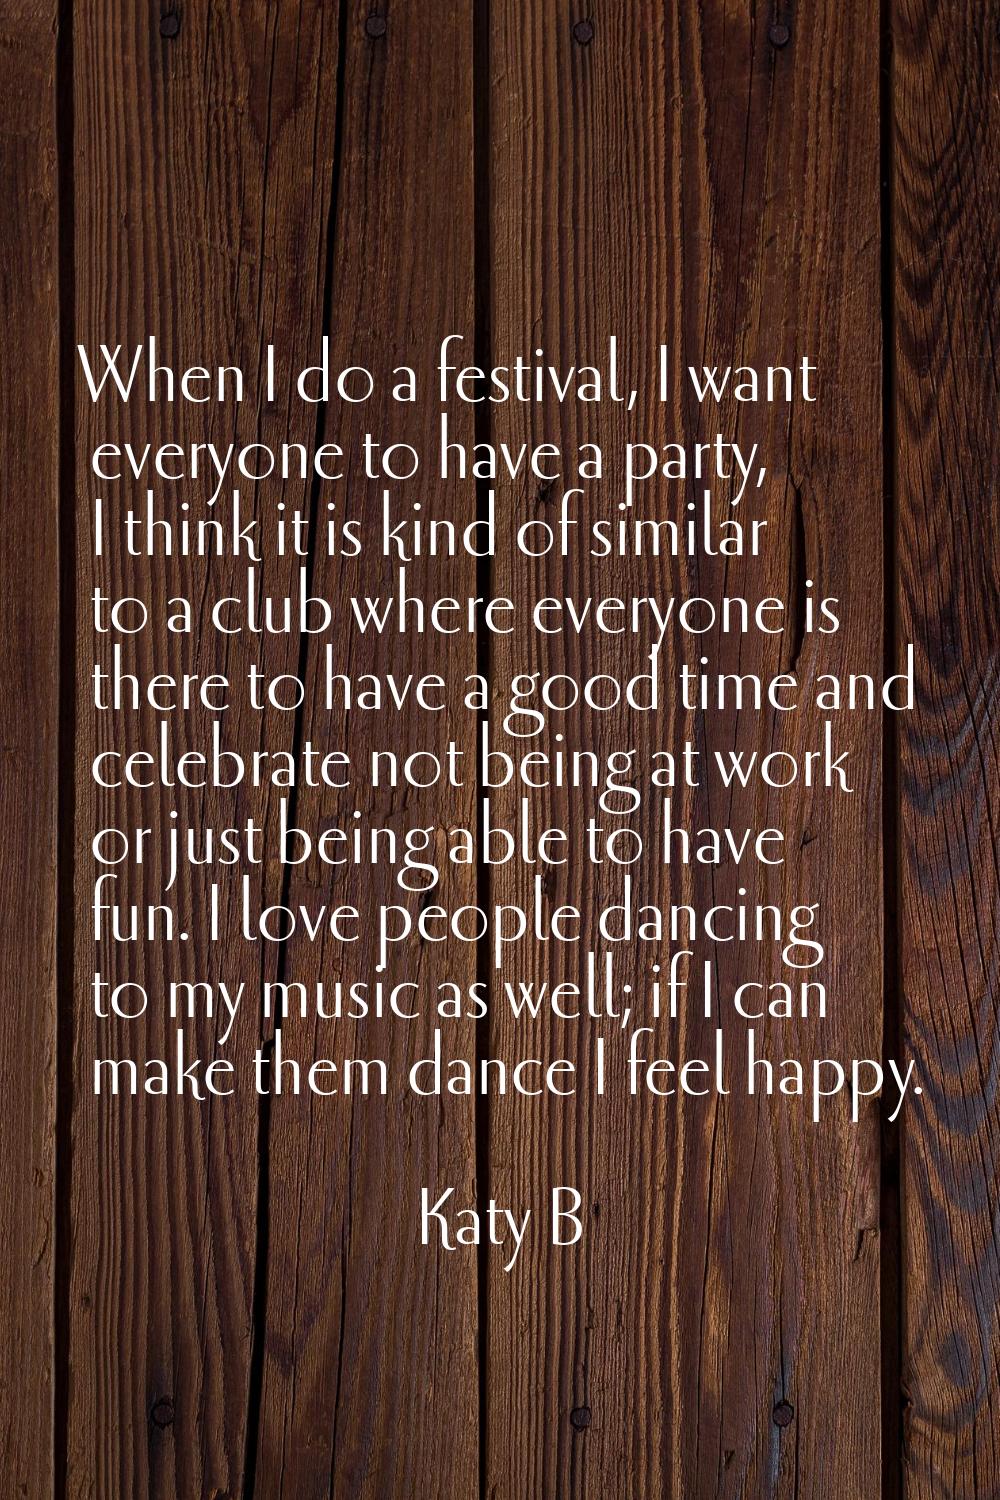 When I do a festival, I want everyone to have a party, I think it is kind of similar to a club wher